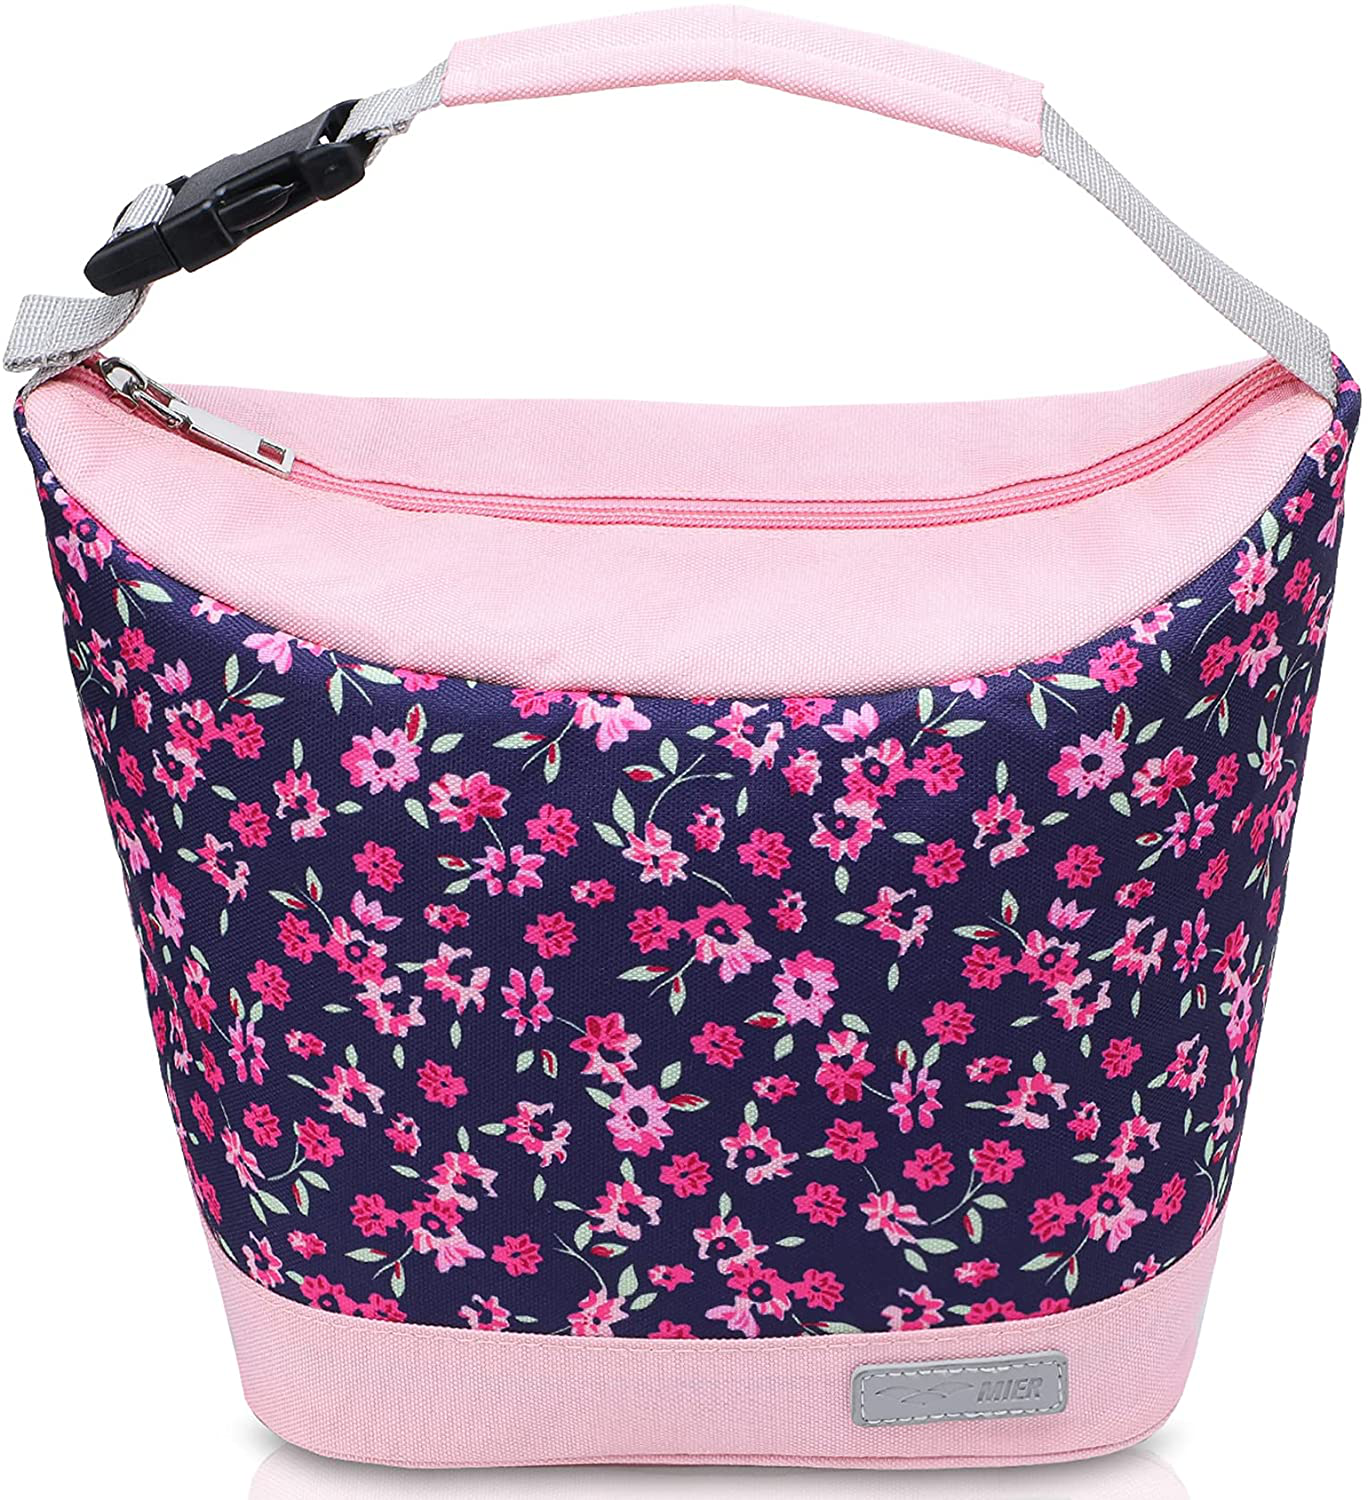 MIER Small Lunch Bag Purse Insulated Leakproof Cooler Lunch Tote for Kids Girls Boys Women Men to School Work Travel Gym, Buckle Handle, Pink & Crabapple